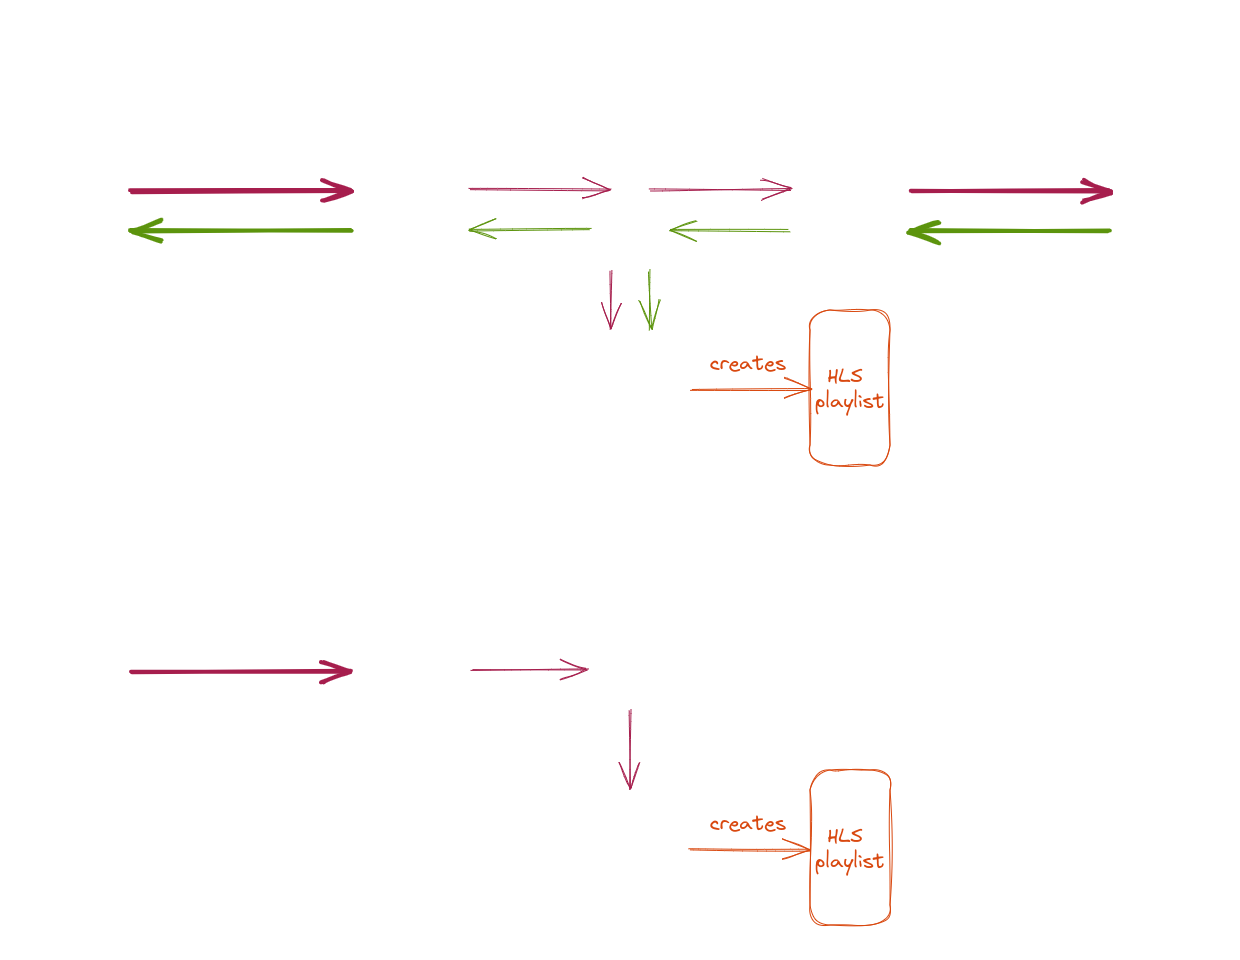 Broadcasting system architecture